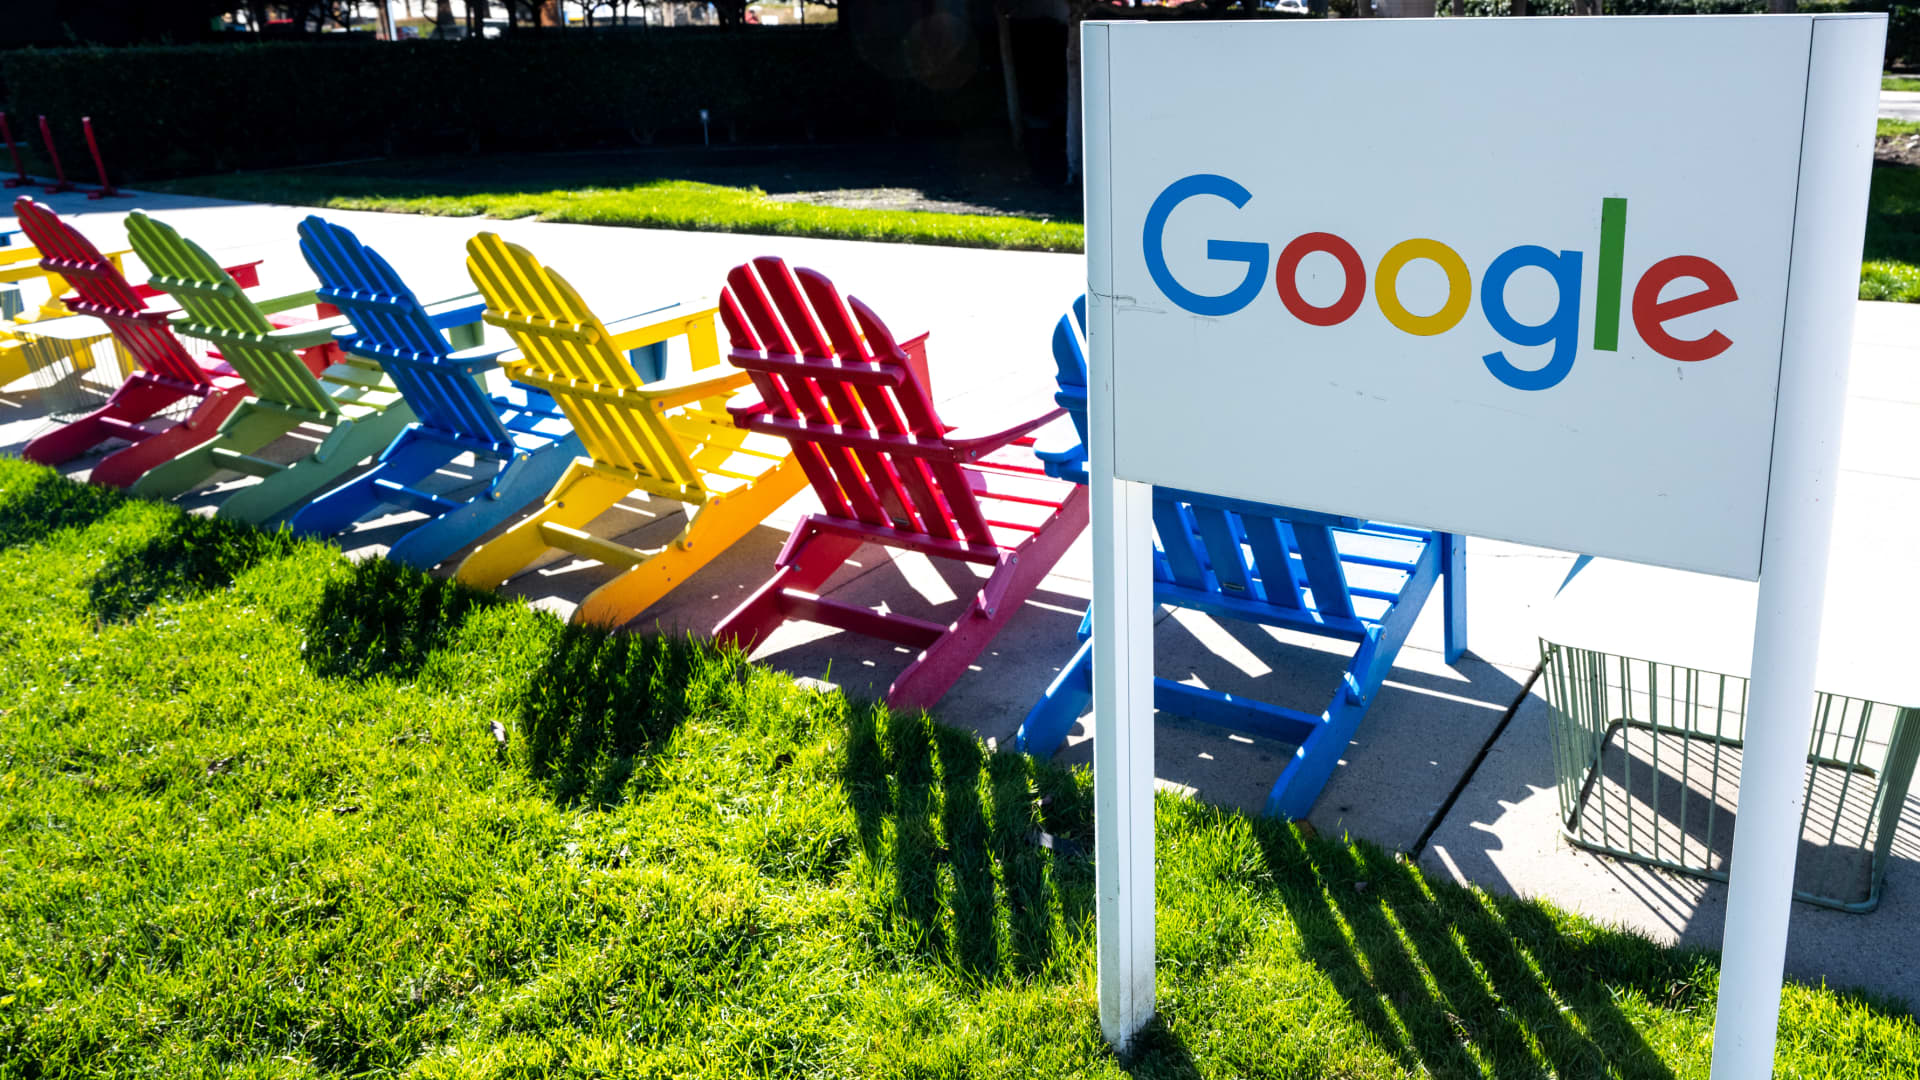 Google is cutting hundreds of jobs across engineering and hardware teams